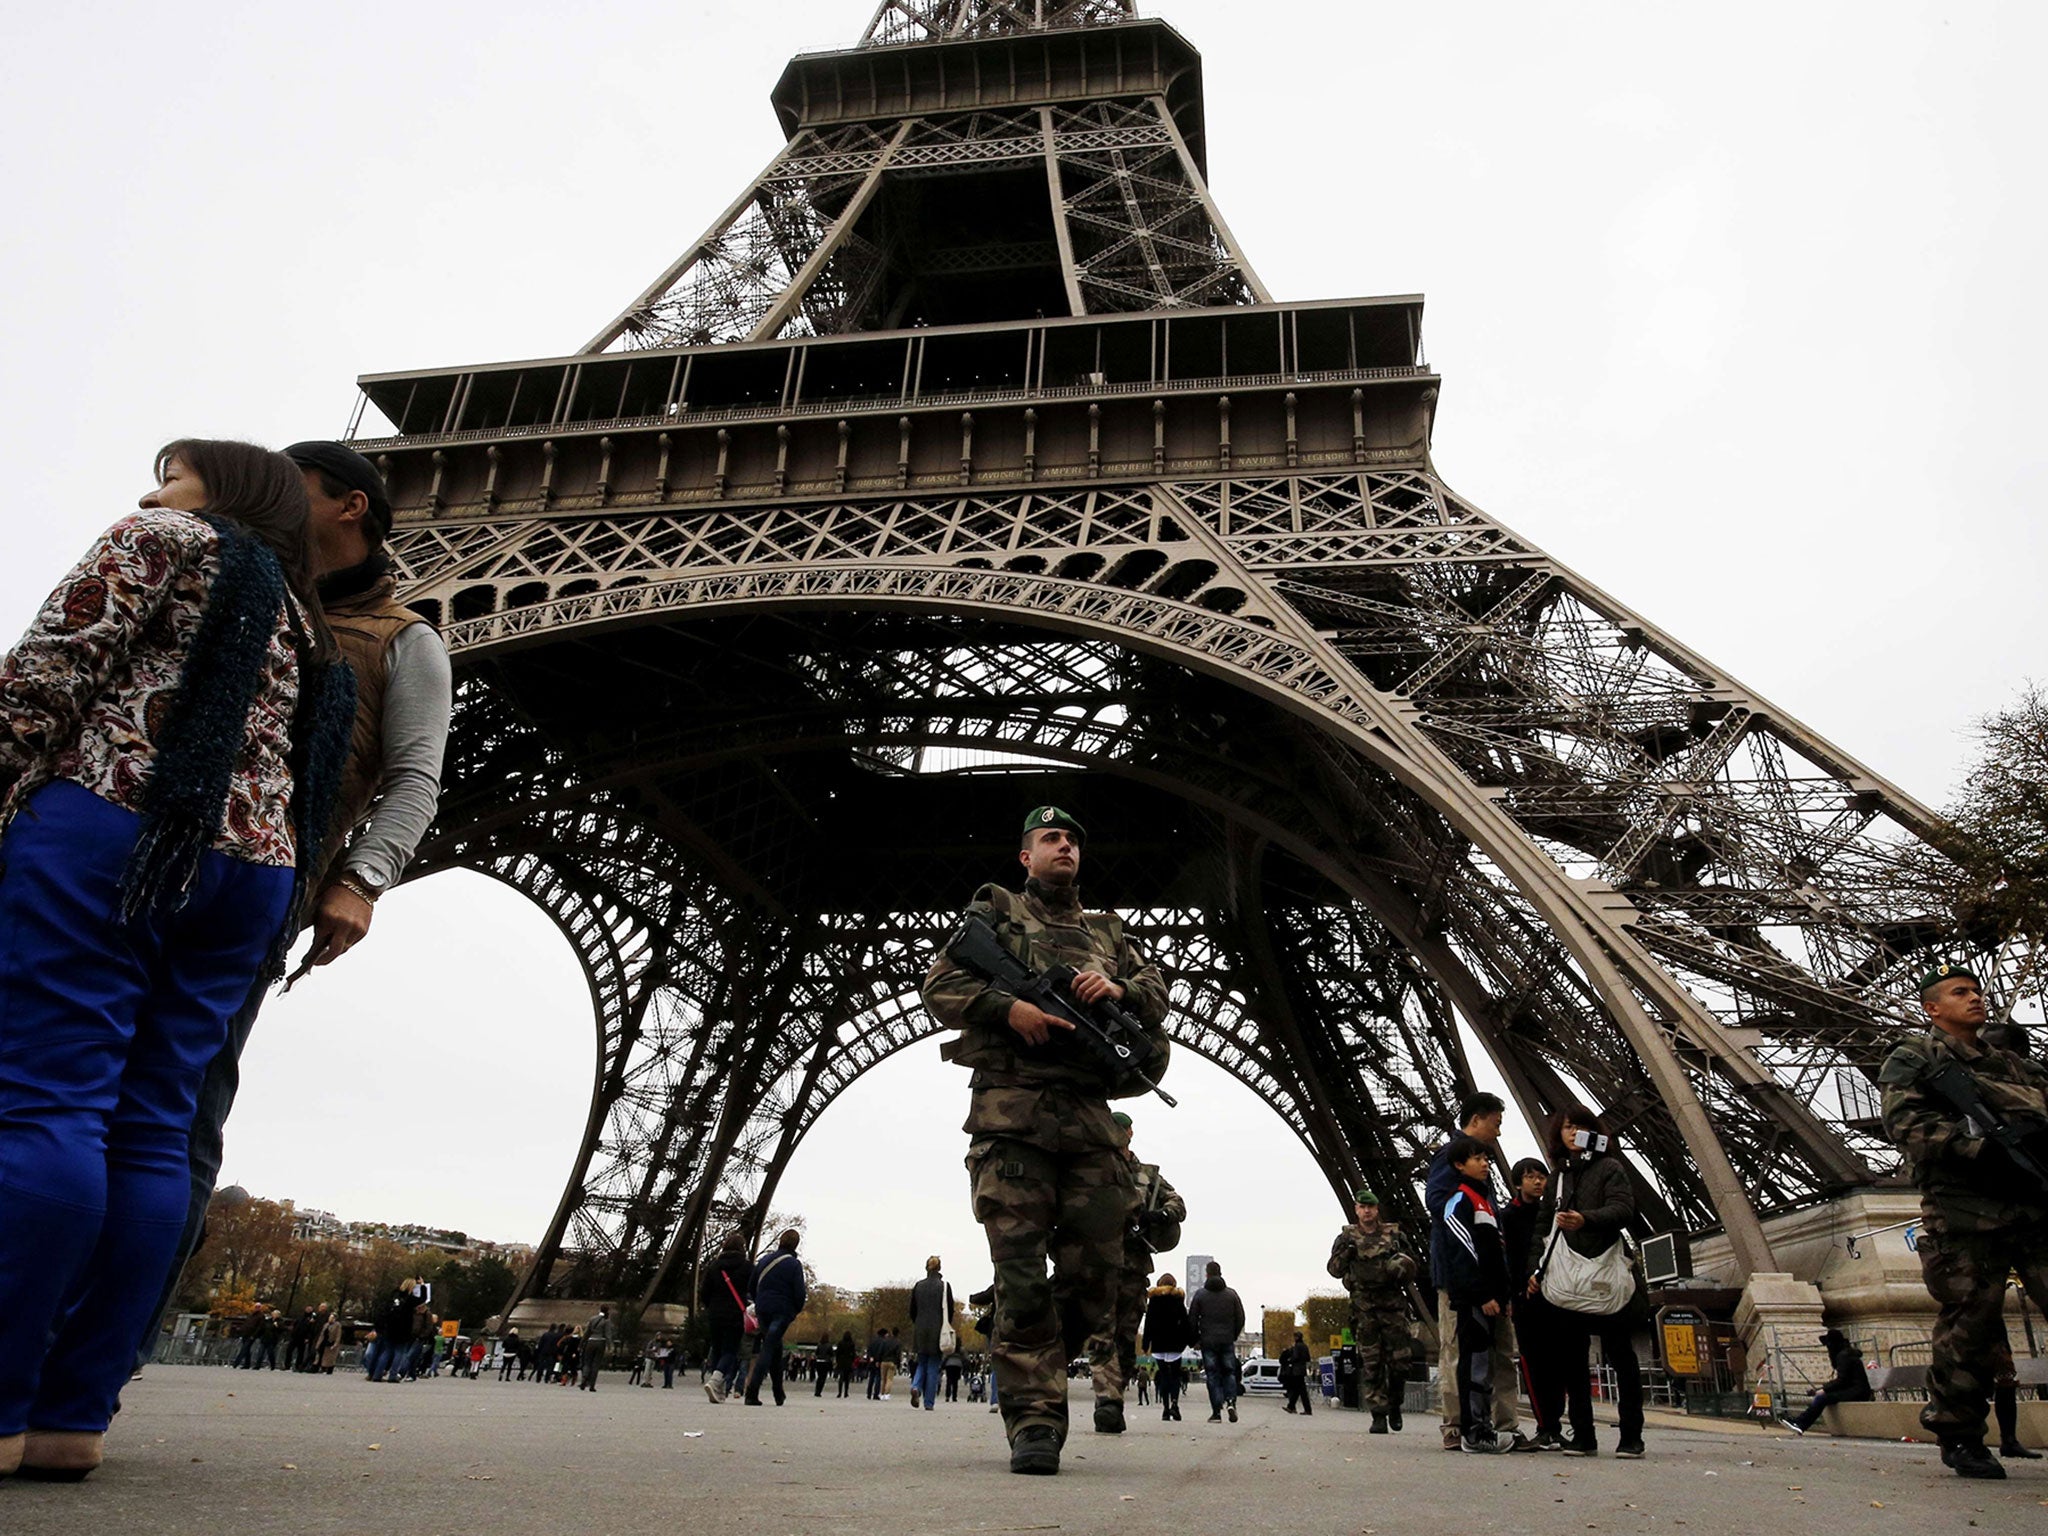 Facebook users who are identified by the mobile app as in Paris will get a notification asking them if they are safe